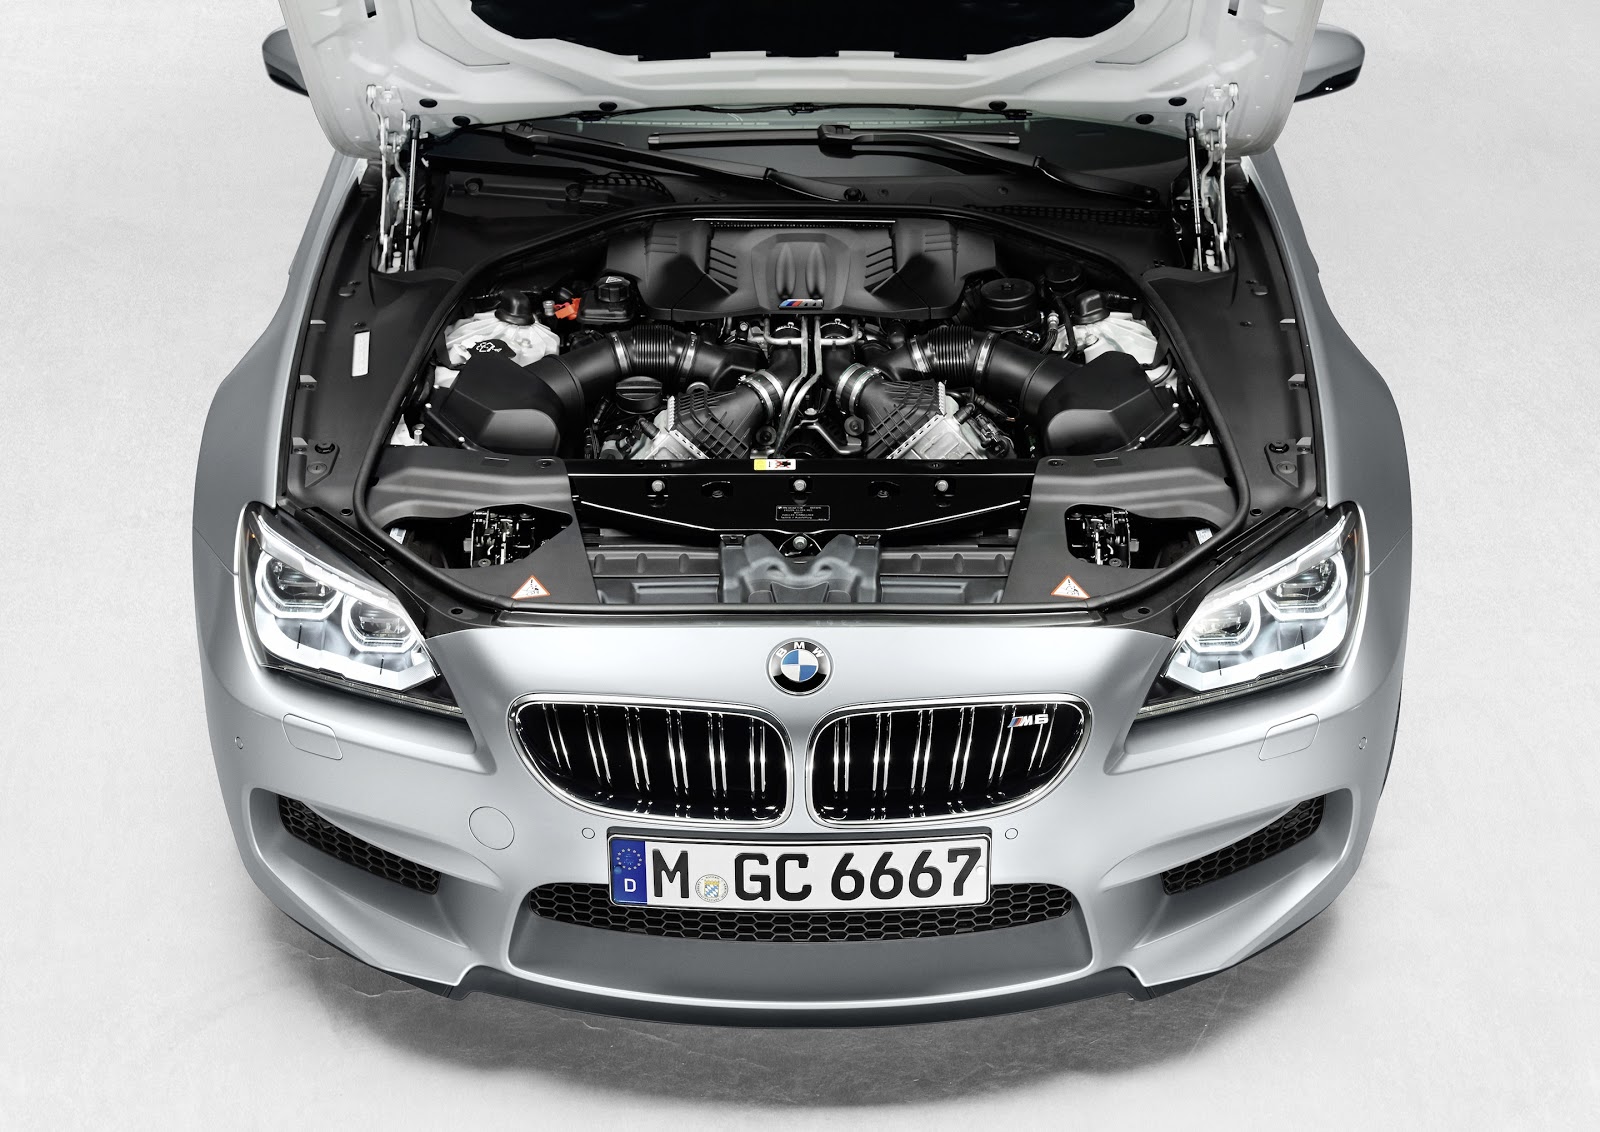 The New Bmw M6 Gran Coupe Released Gallery Bmw Markham